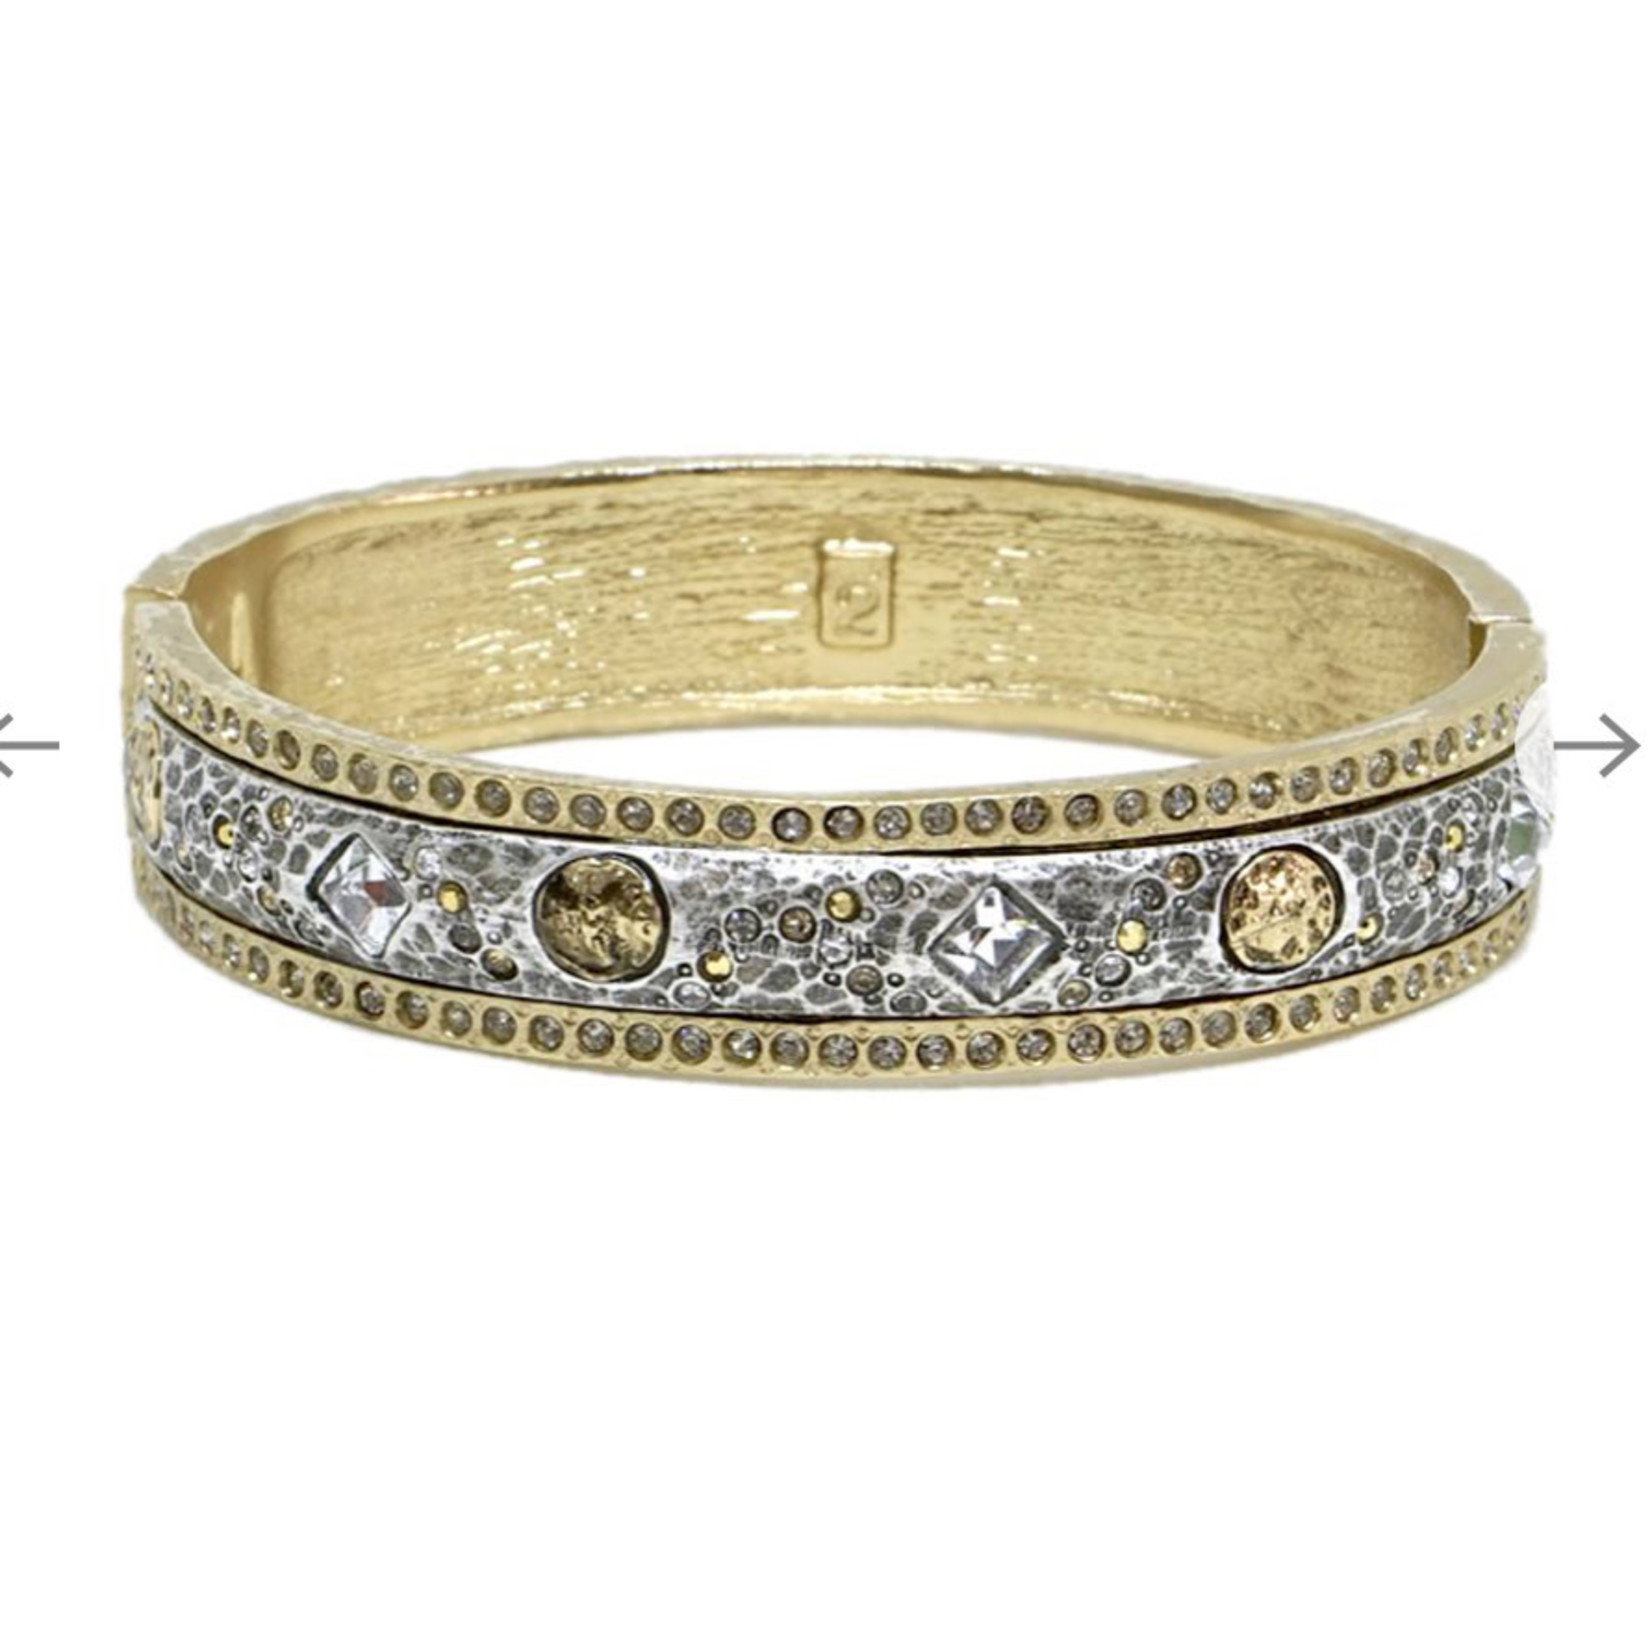 Tat2 Designs Gold Skhirat ID Bangle W/SV Insert and W Crystals Enlayed